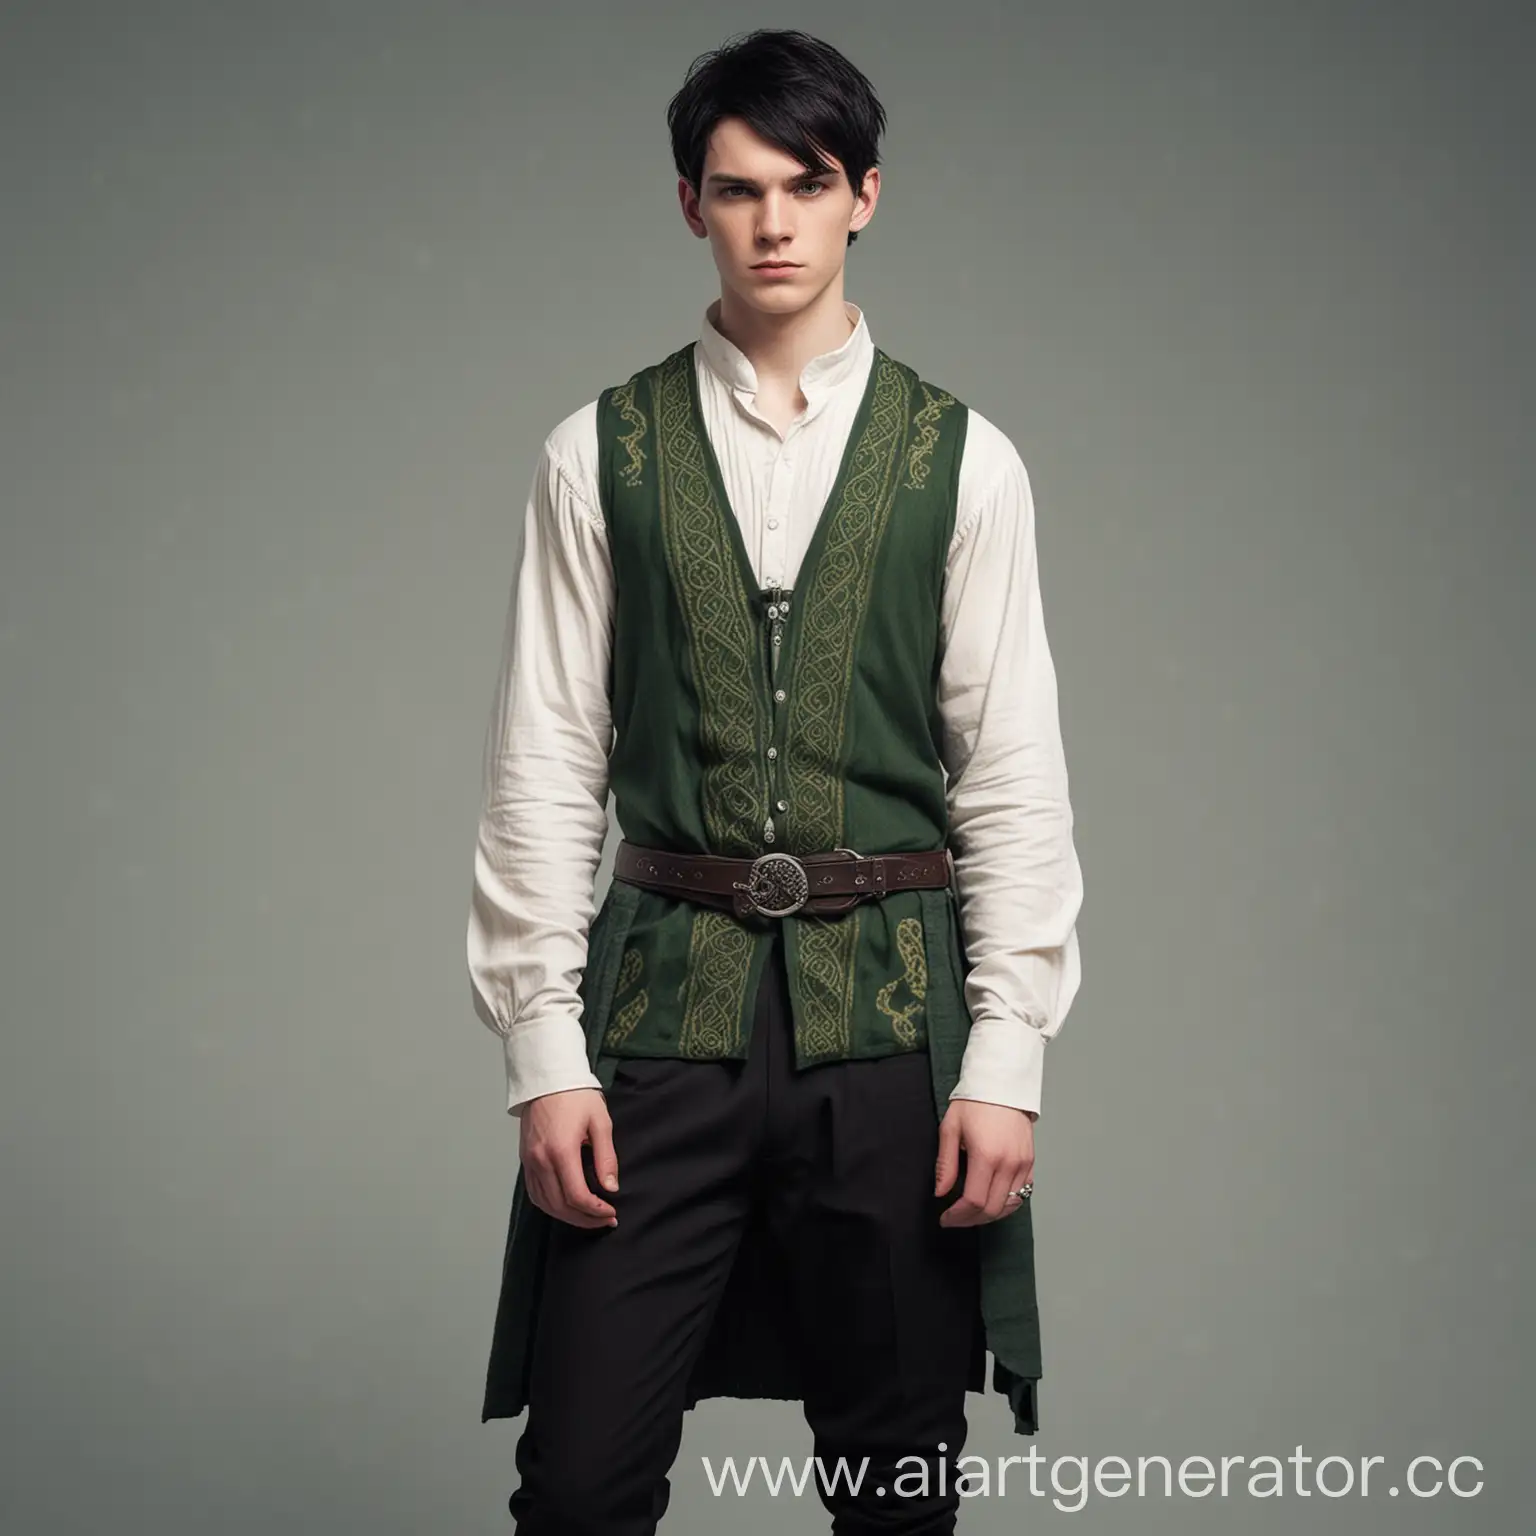 Young-Man-in-Celtic-Attire-Annoyed-Expression